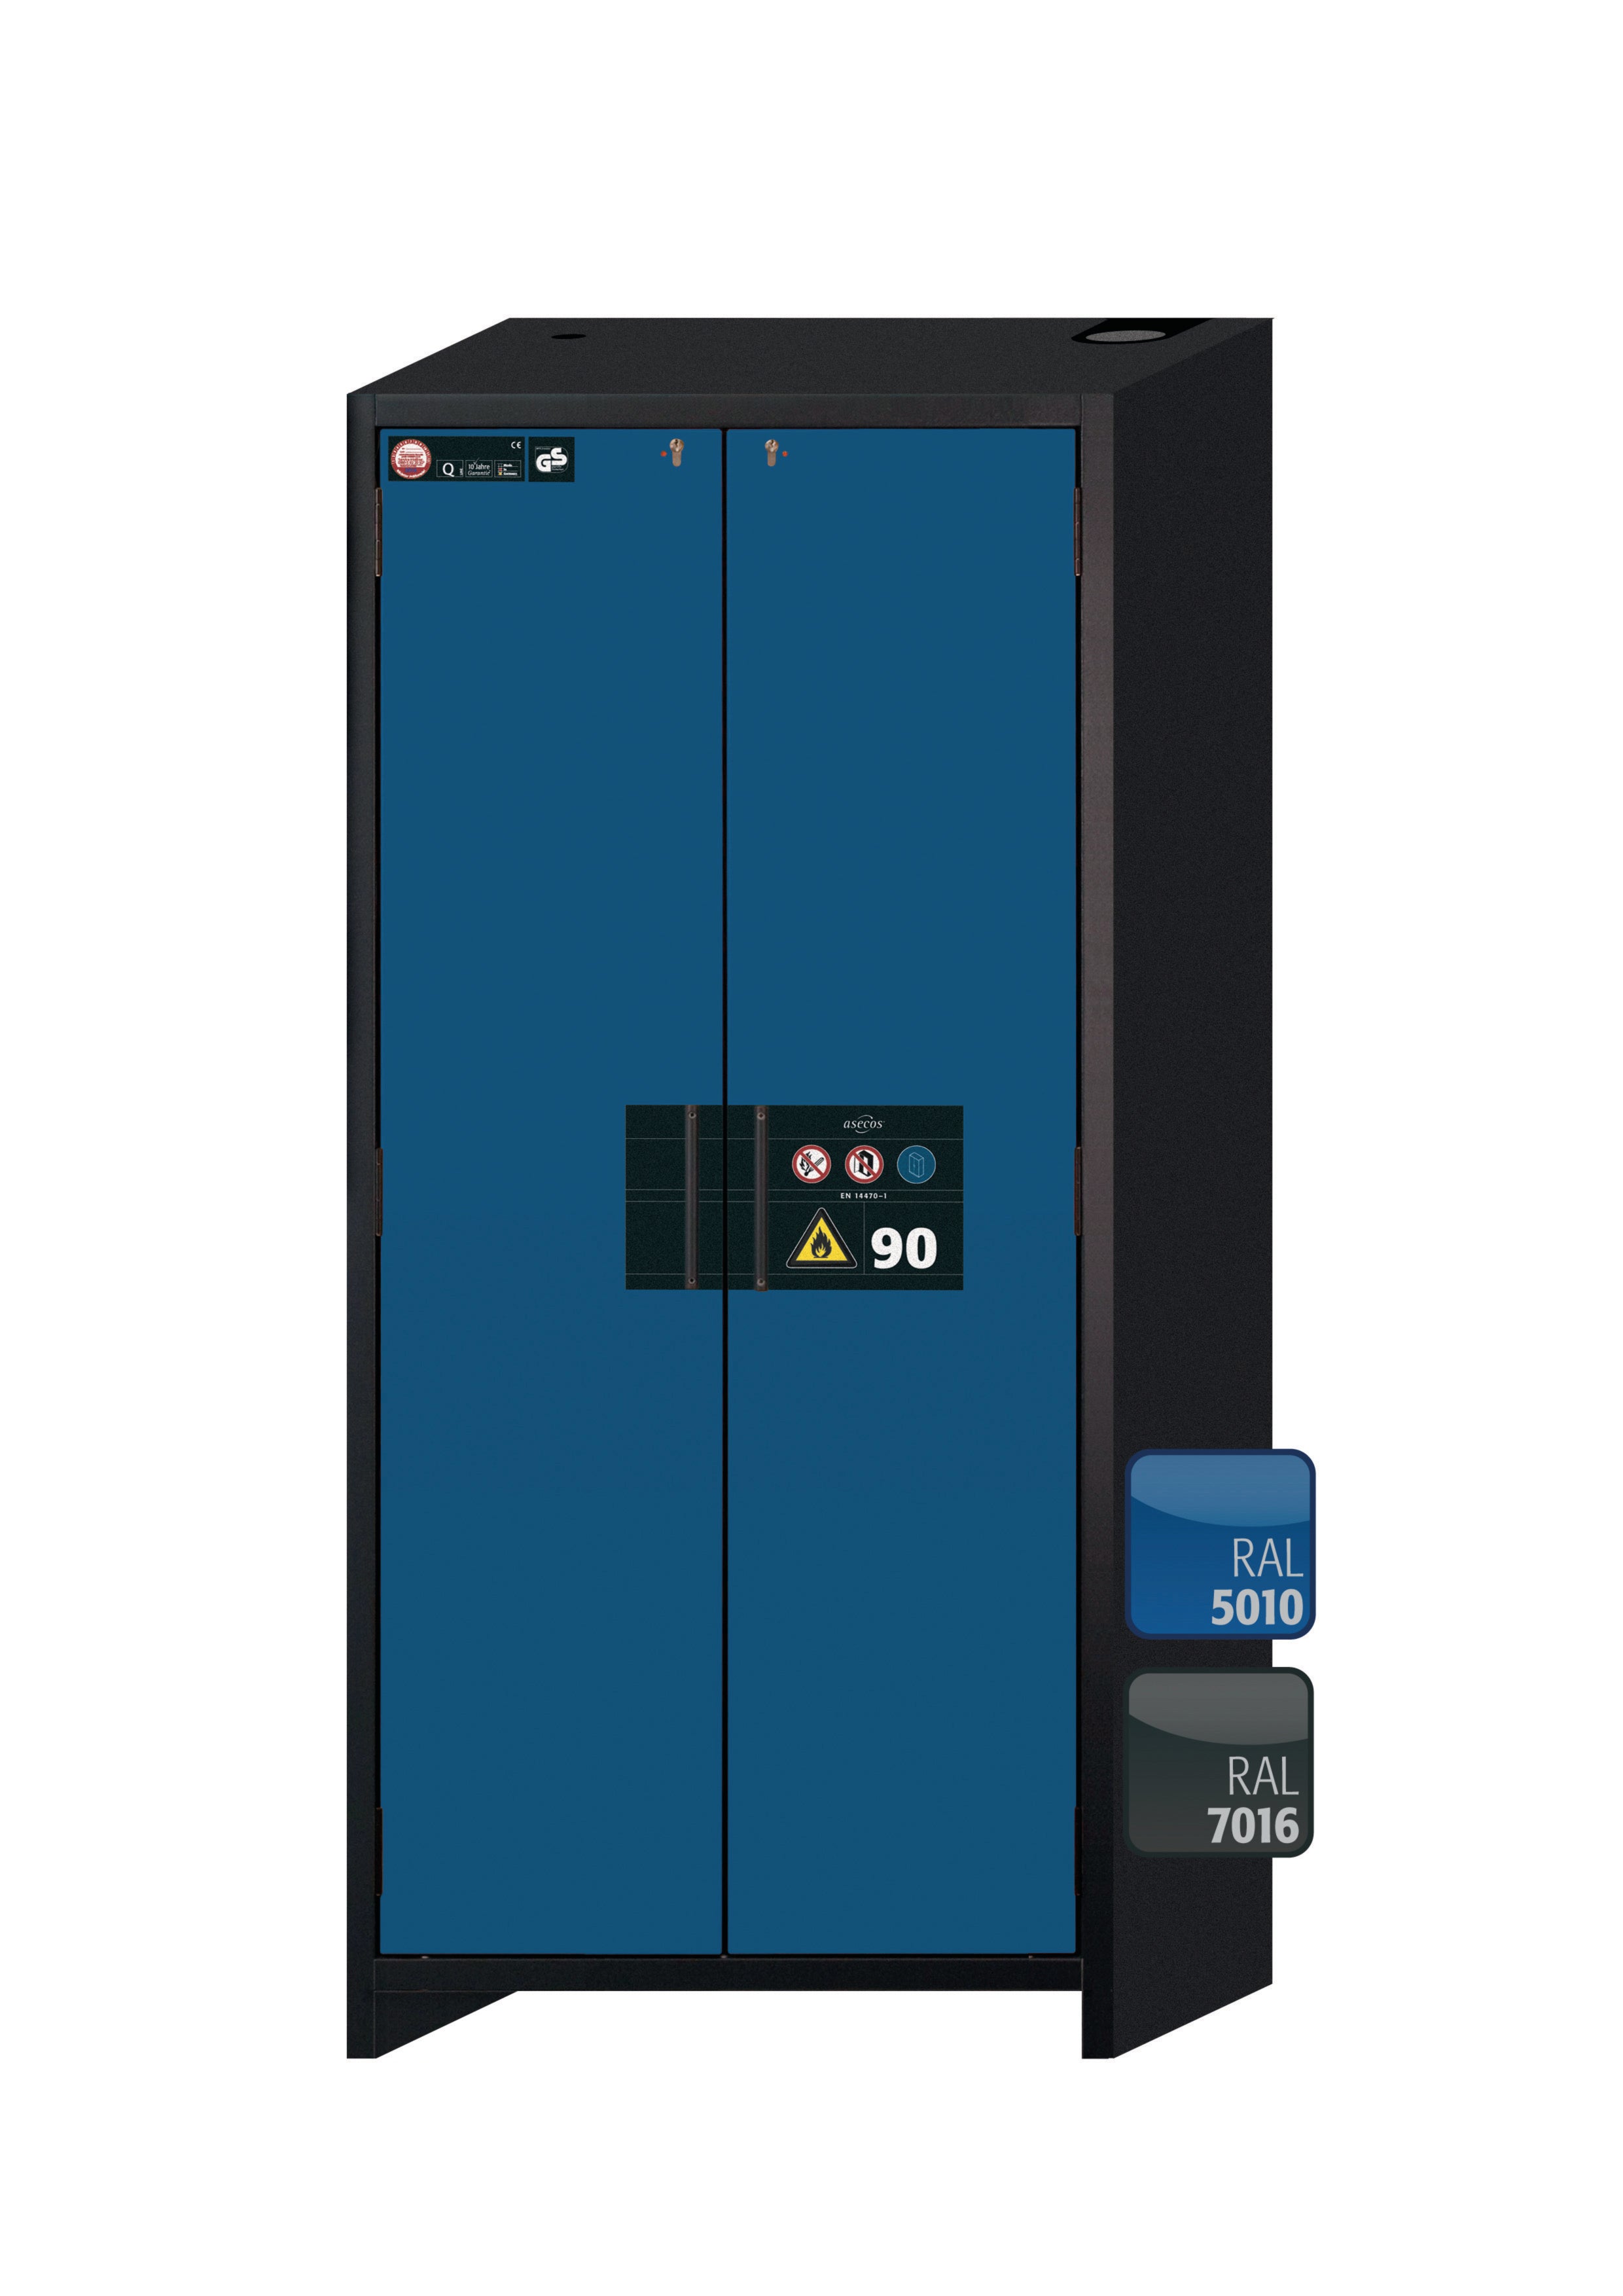 Type 90 safety storage cabinet Q-CLASSIC-90 model Q90.195.090 in gentian blue RAL 5010 with 6x drawer (standard) (sheet steel),